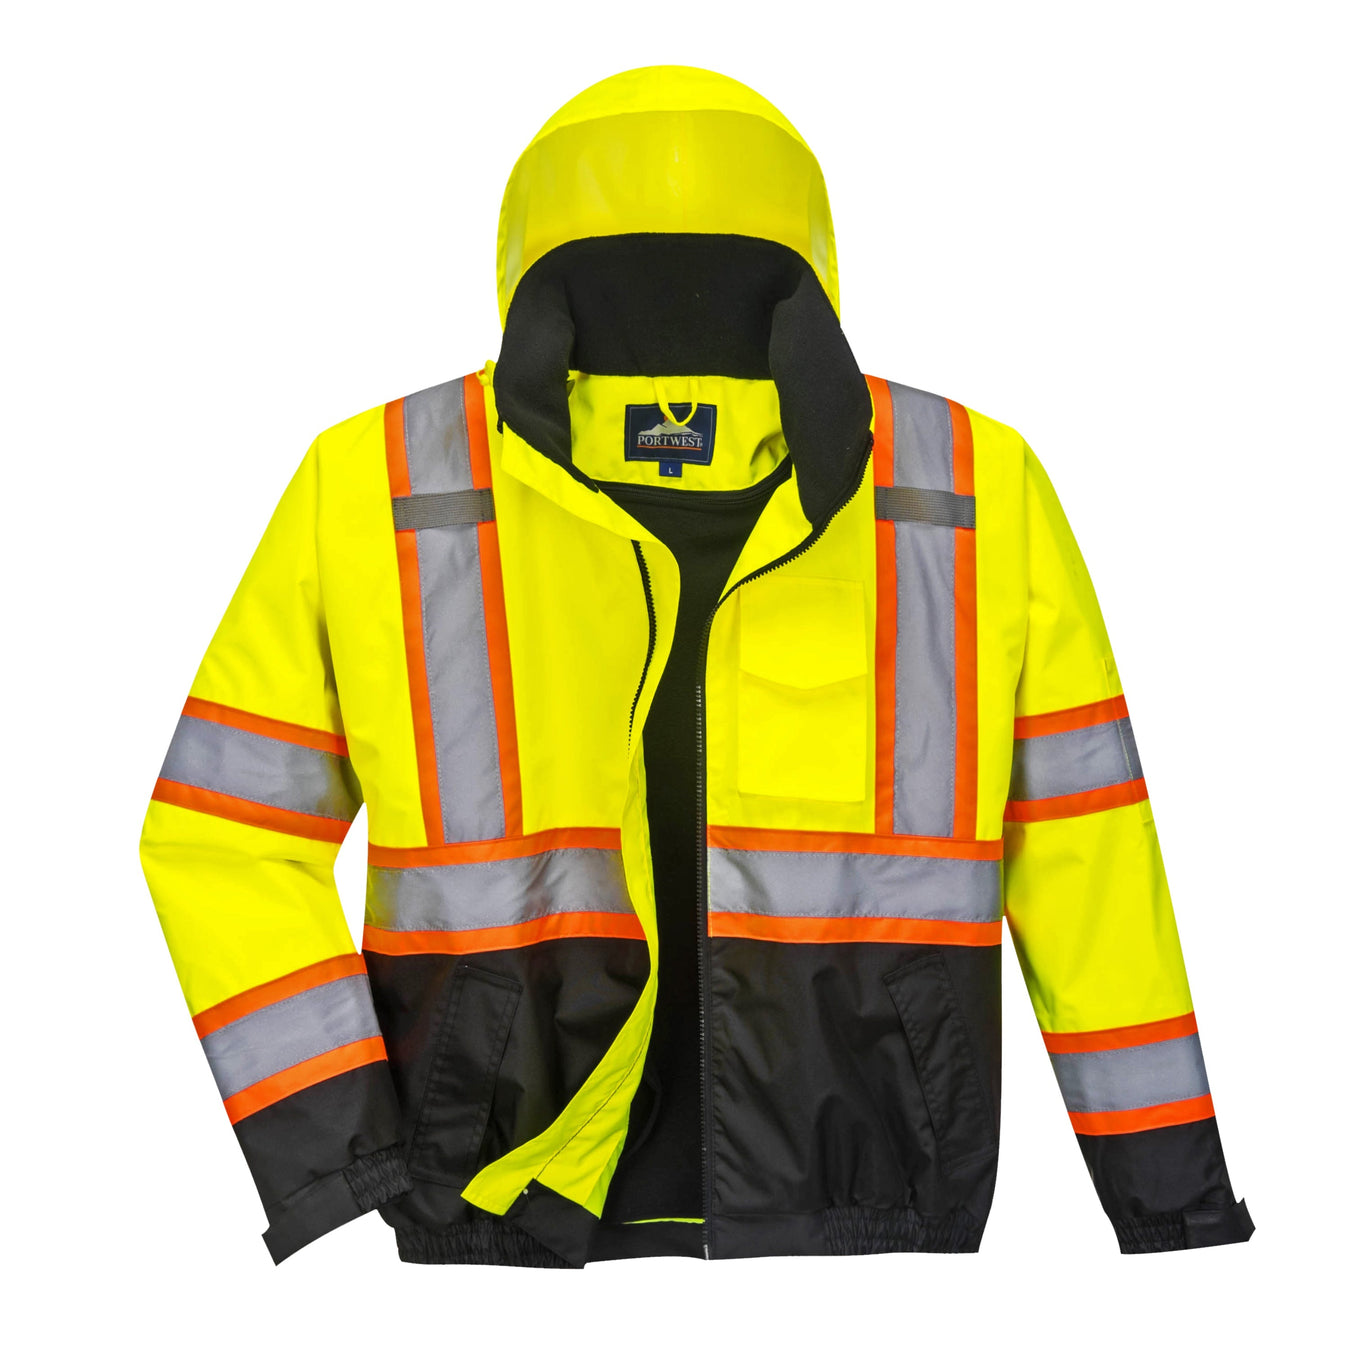 Two Tone Hi Vis Safety Jackets